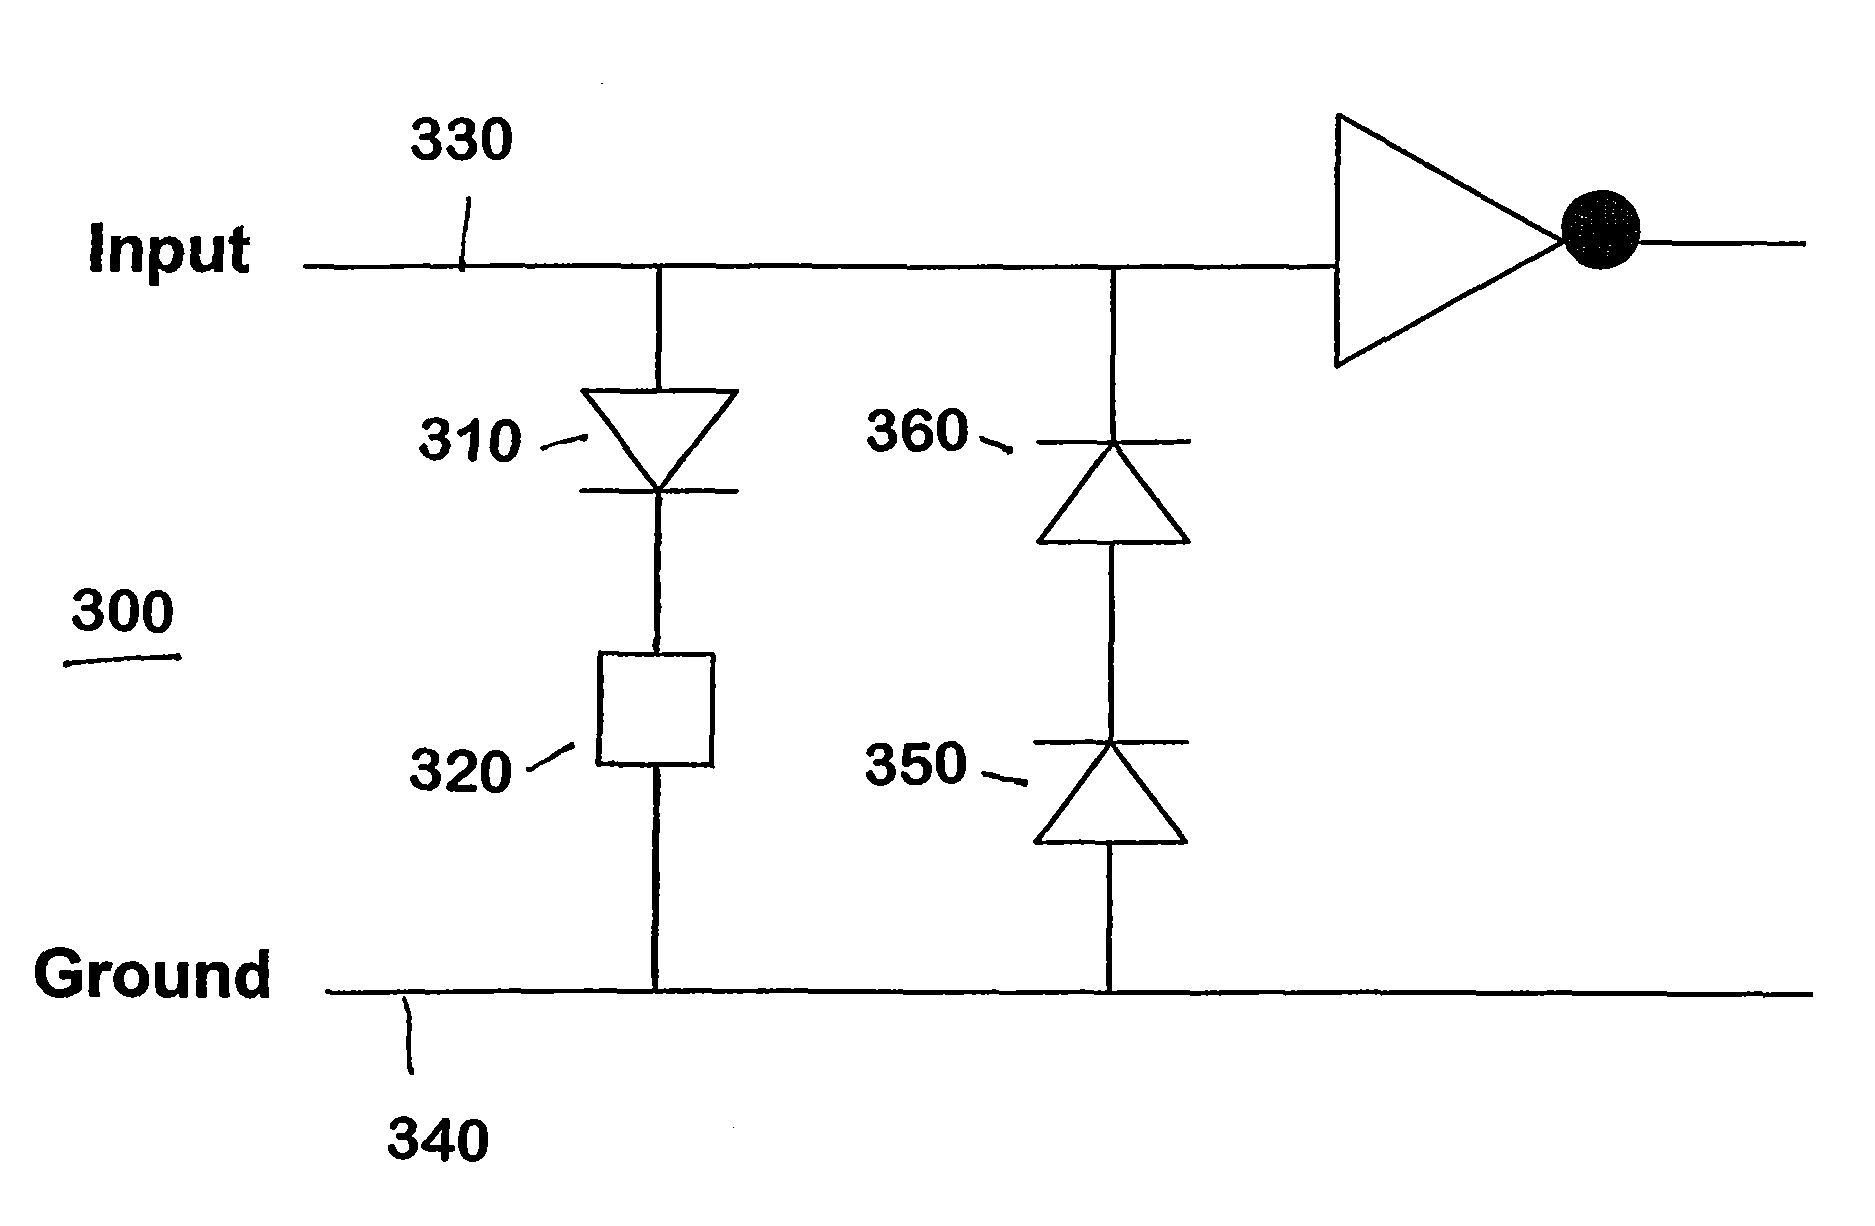 Low capacitance ESD protection structure for high speed input pins